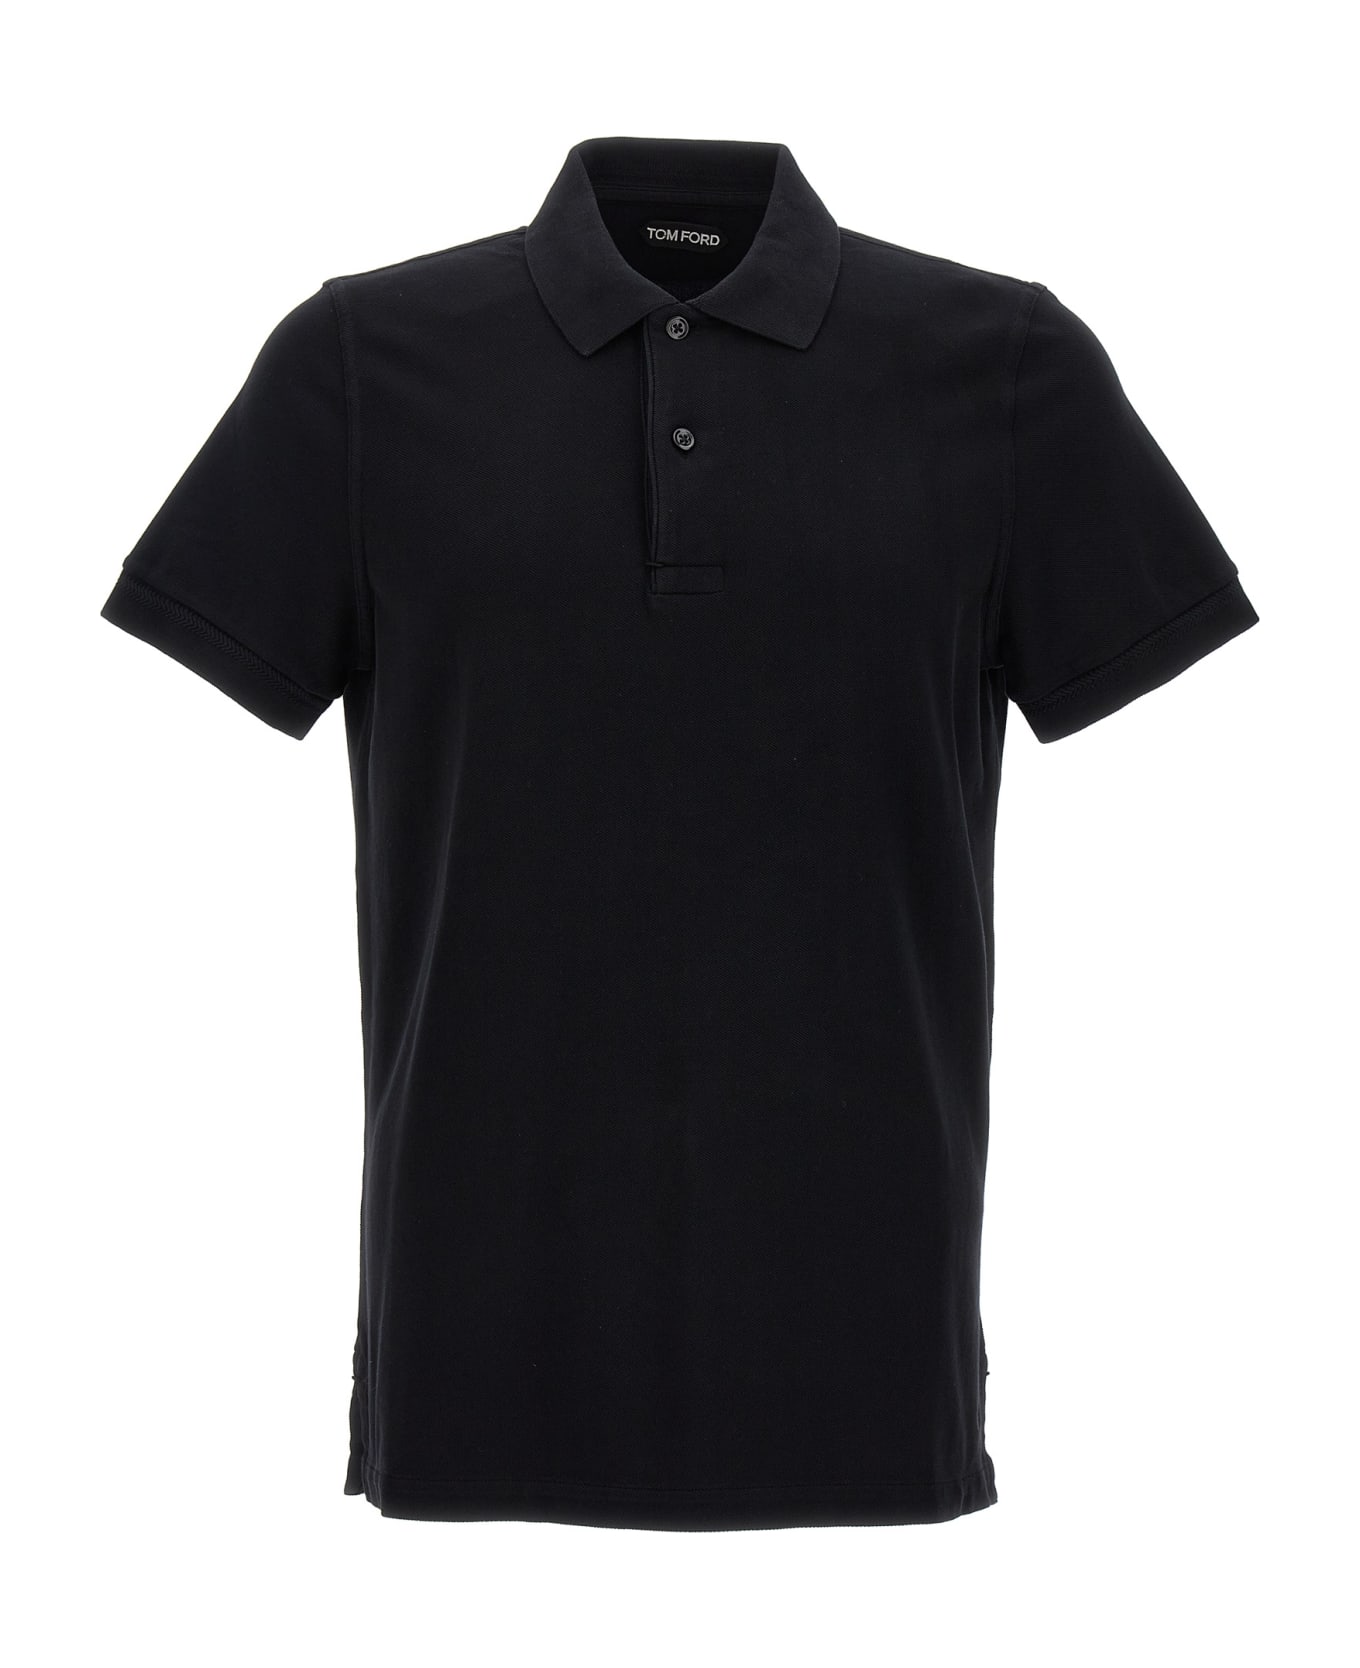 Tom Ford Logo Embroidery Polo Shirt - Black ポロシャツ